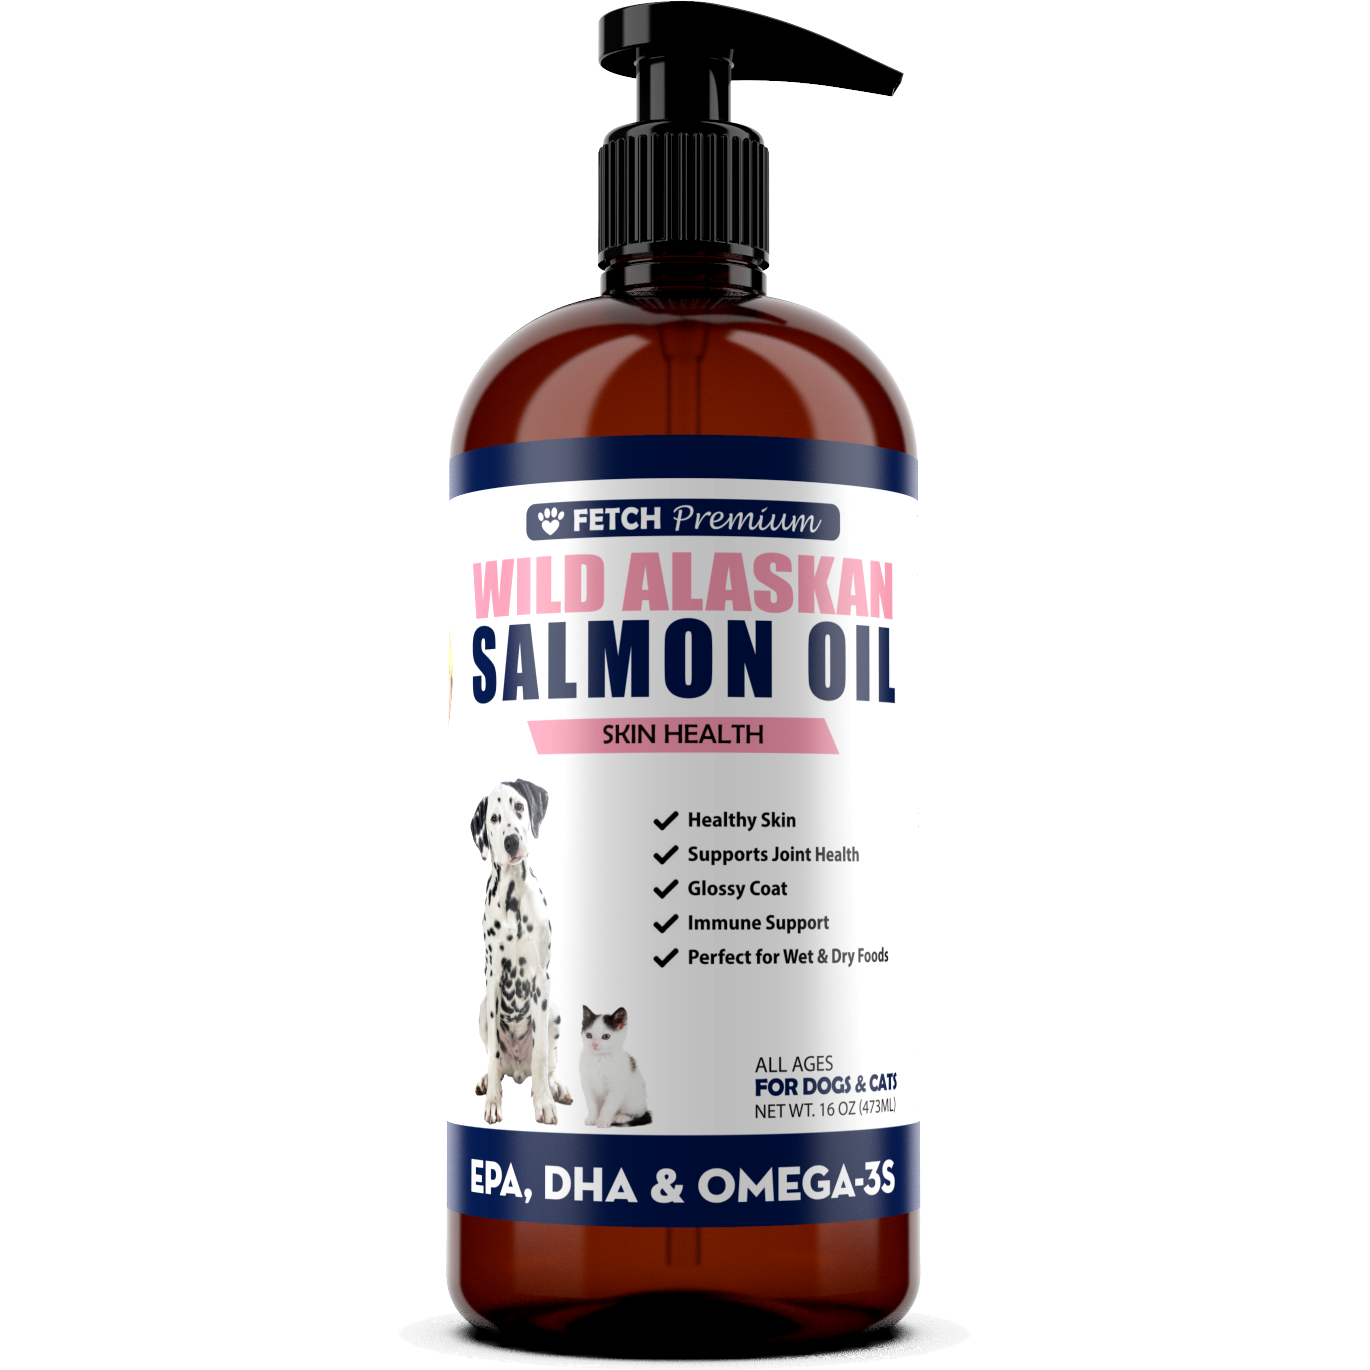 Wild Alaskan Salmon Oil for Dogs & Cats Skin Health with Omega 3 –